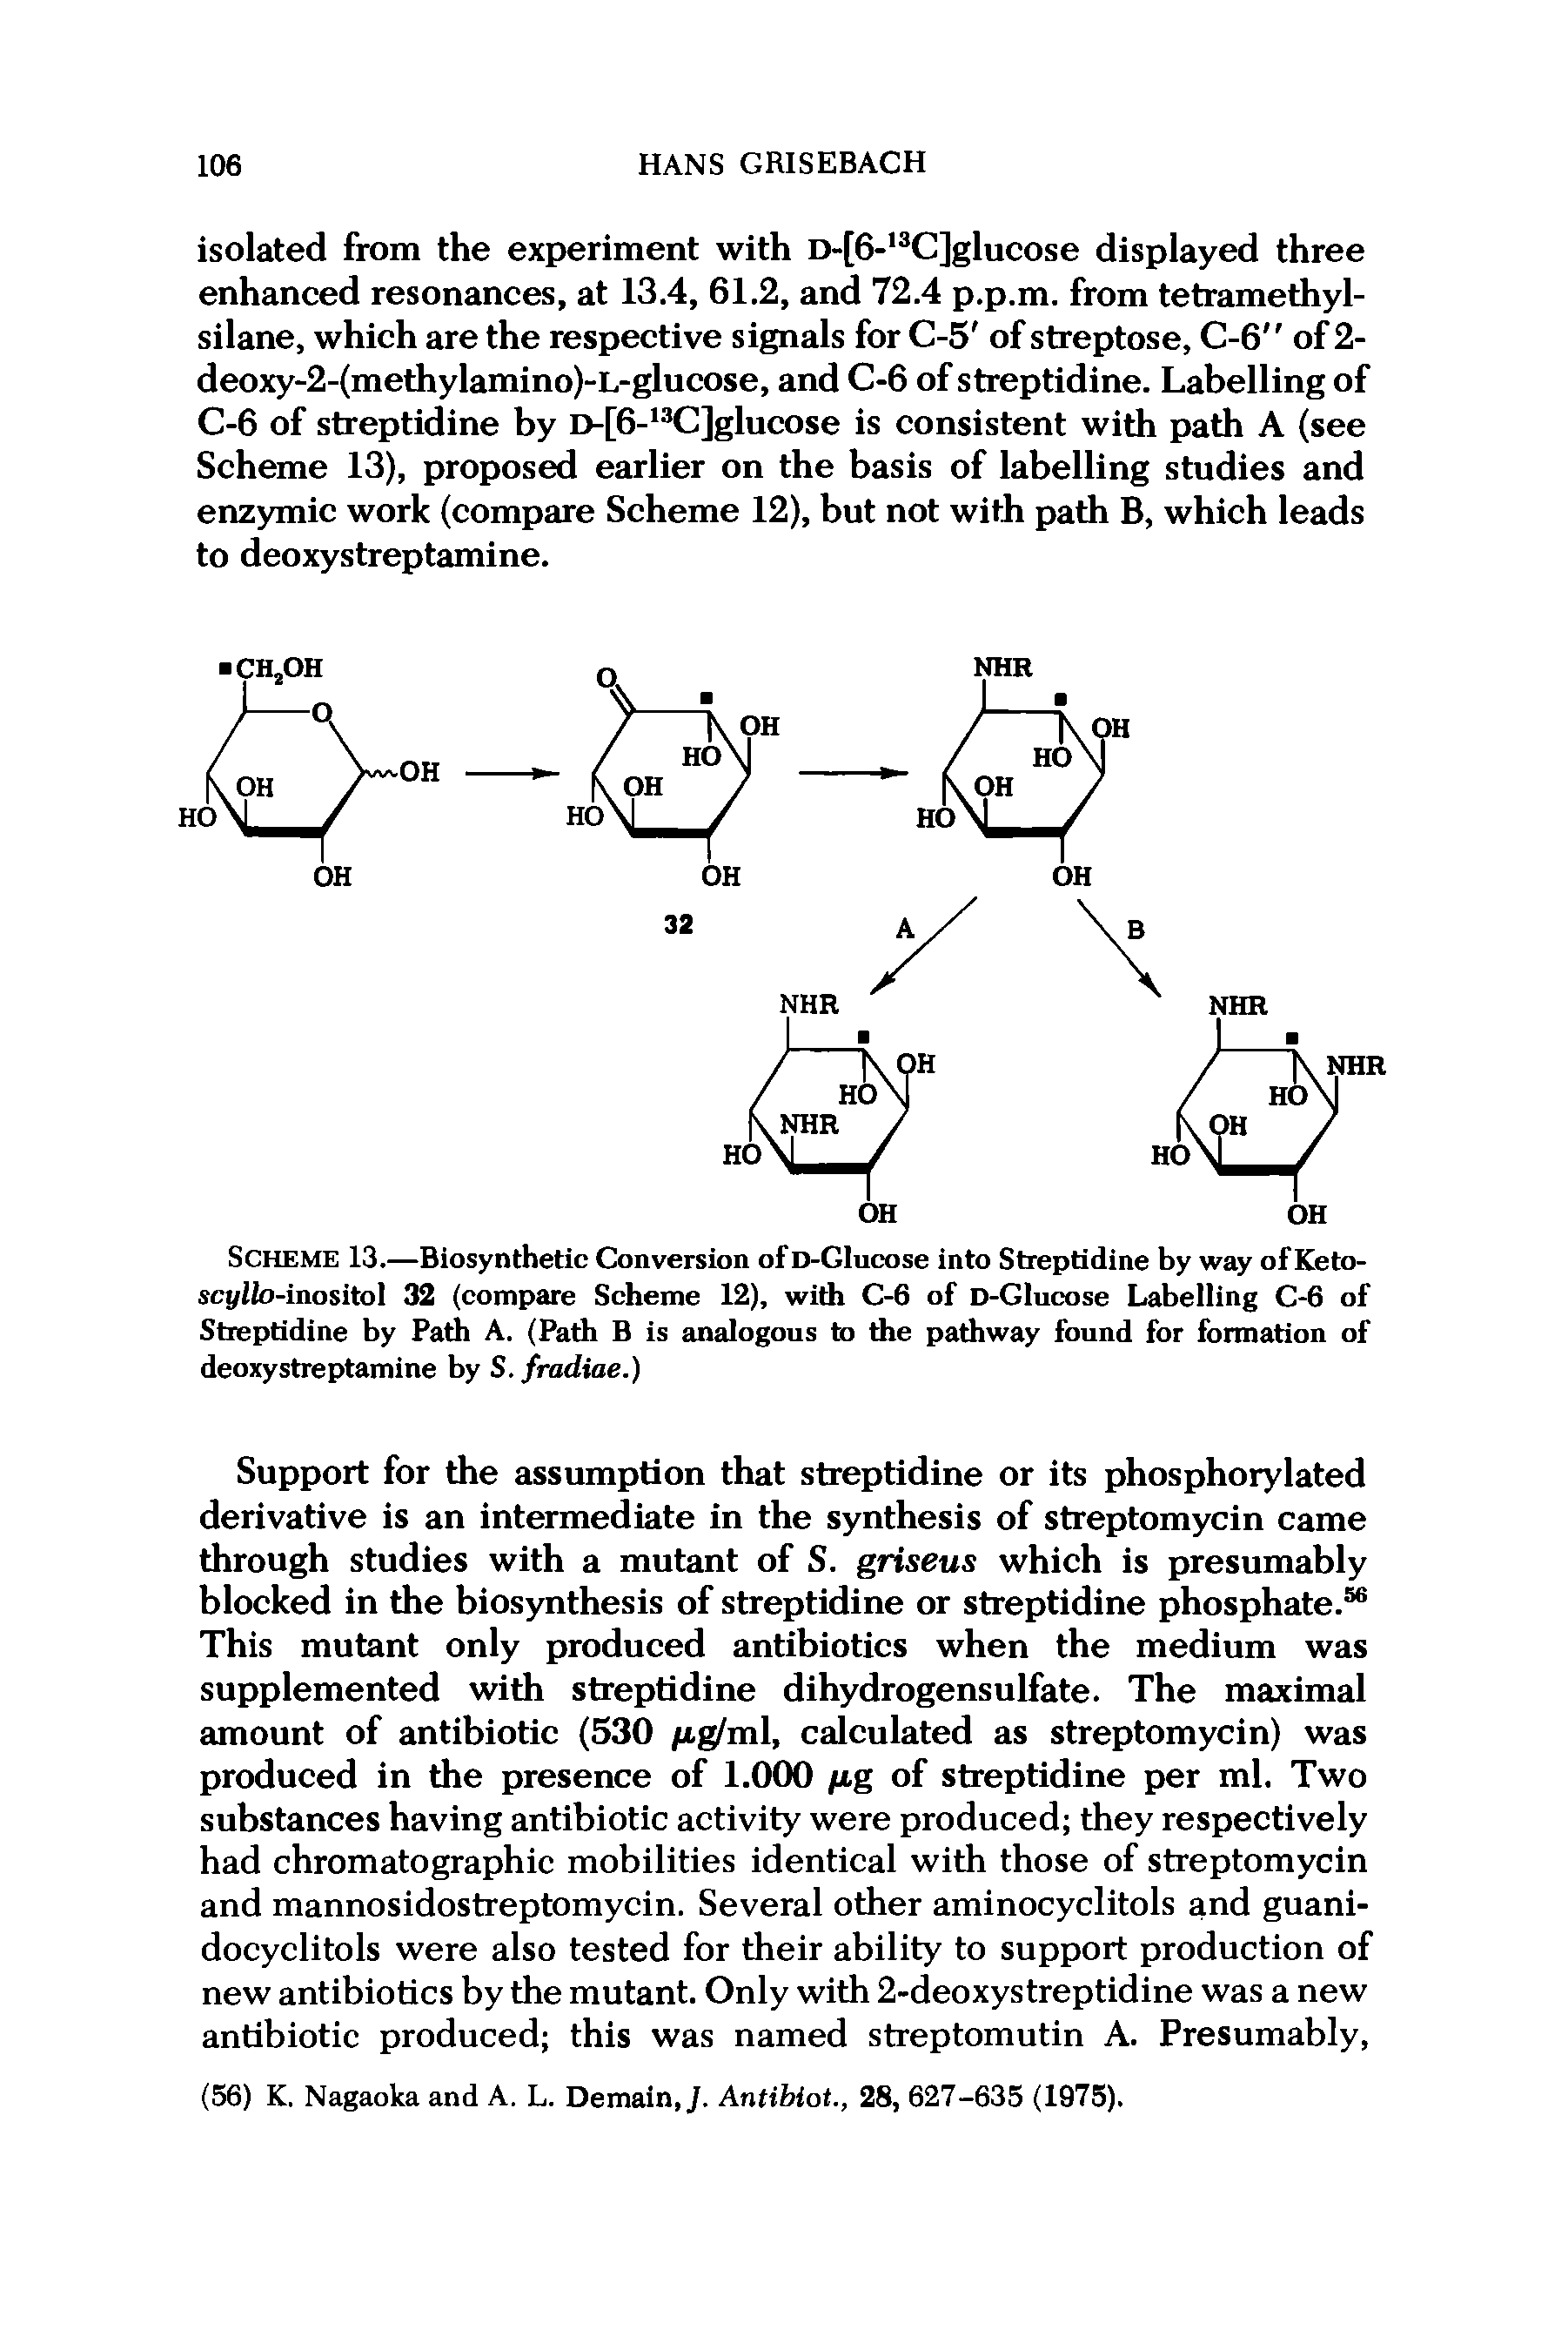 Scheme 13.—Biosynthetic Conversion of D-Glucose into Streptidine by way of Keto-sci/iio-inositol 32 (compare Scheme 12), with C-6 of D-Glucose Labelling C-6 of Streptidine by Path A. (Path B is analogous to the pathway found for formation of deoxystreptamine by S. fradiae.)...